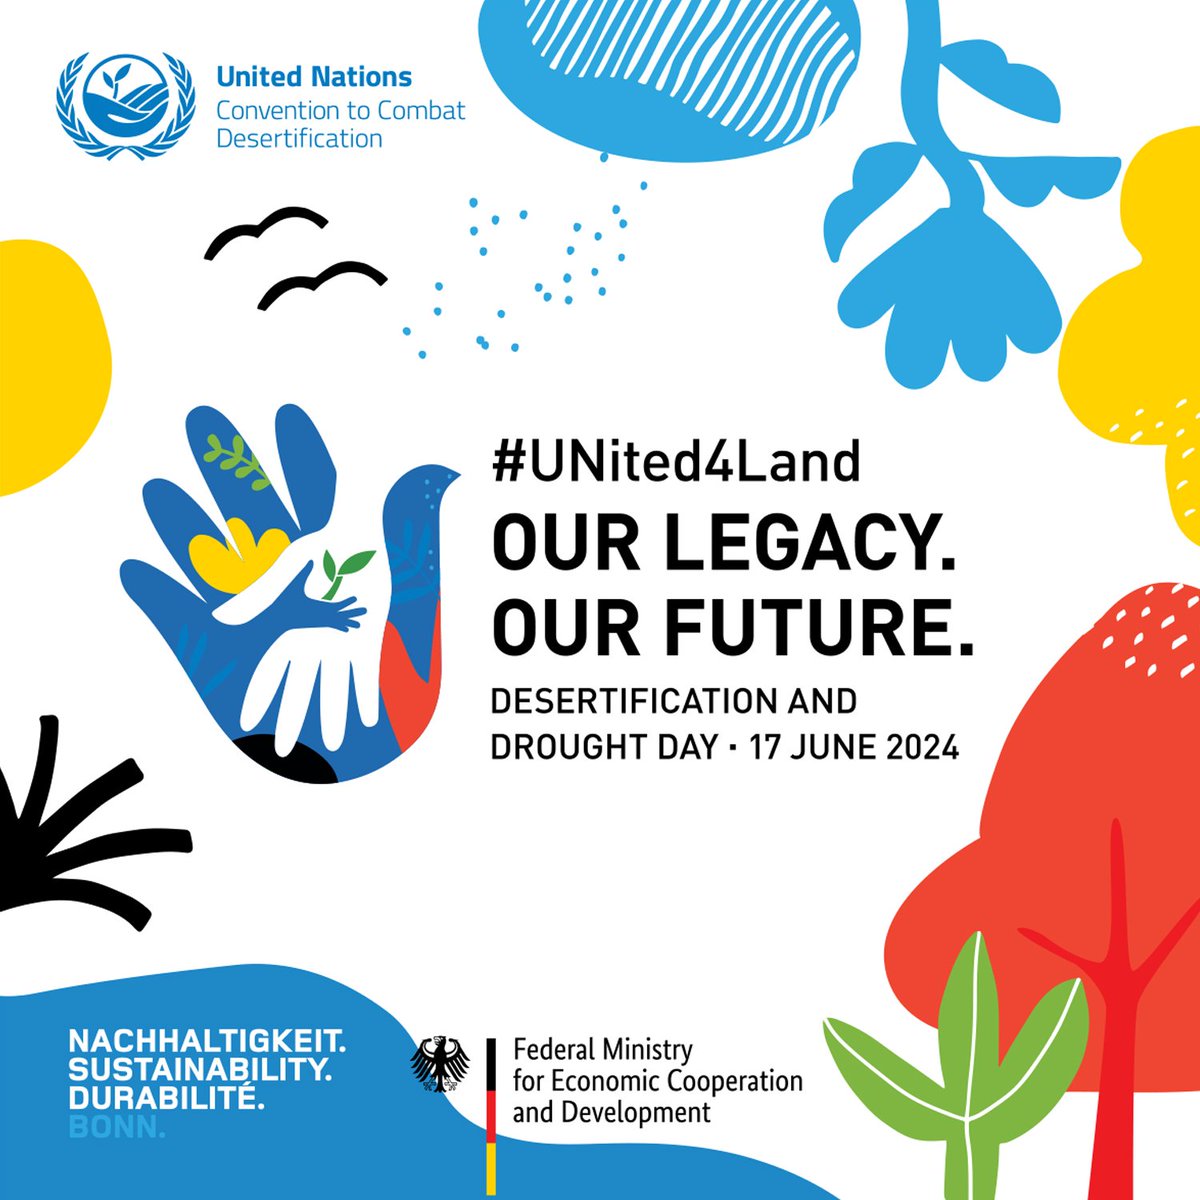 #DesertificationAndDroughtDay, let's unite for land: our legacy, our future. 🌱
Every second, 4 football fields of land degrade - we aim to restore 1.5 billion hectares by 2030. Join us in reversing land loss for a sustainable tomorrow. #United4Land ➡️ unccd.int/DDD2024